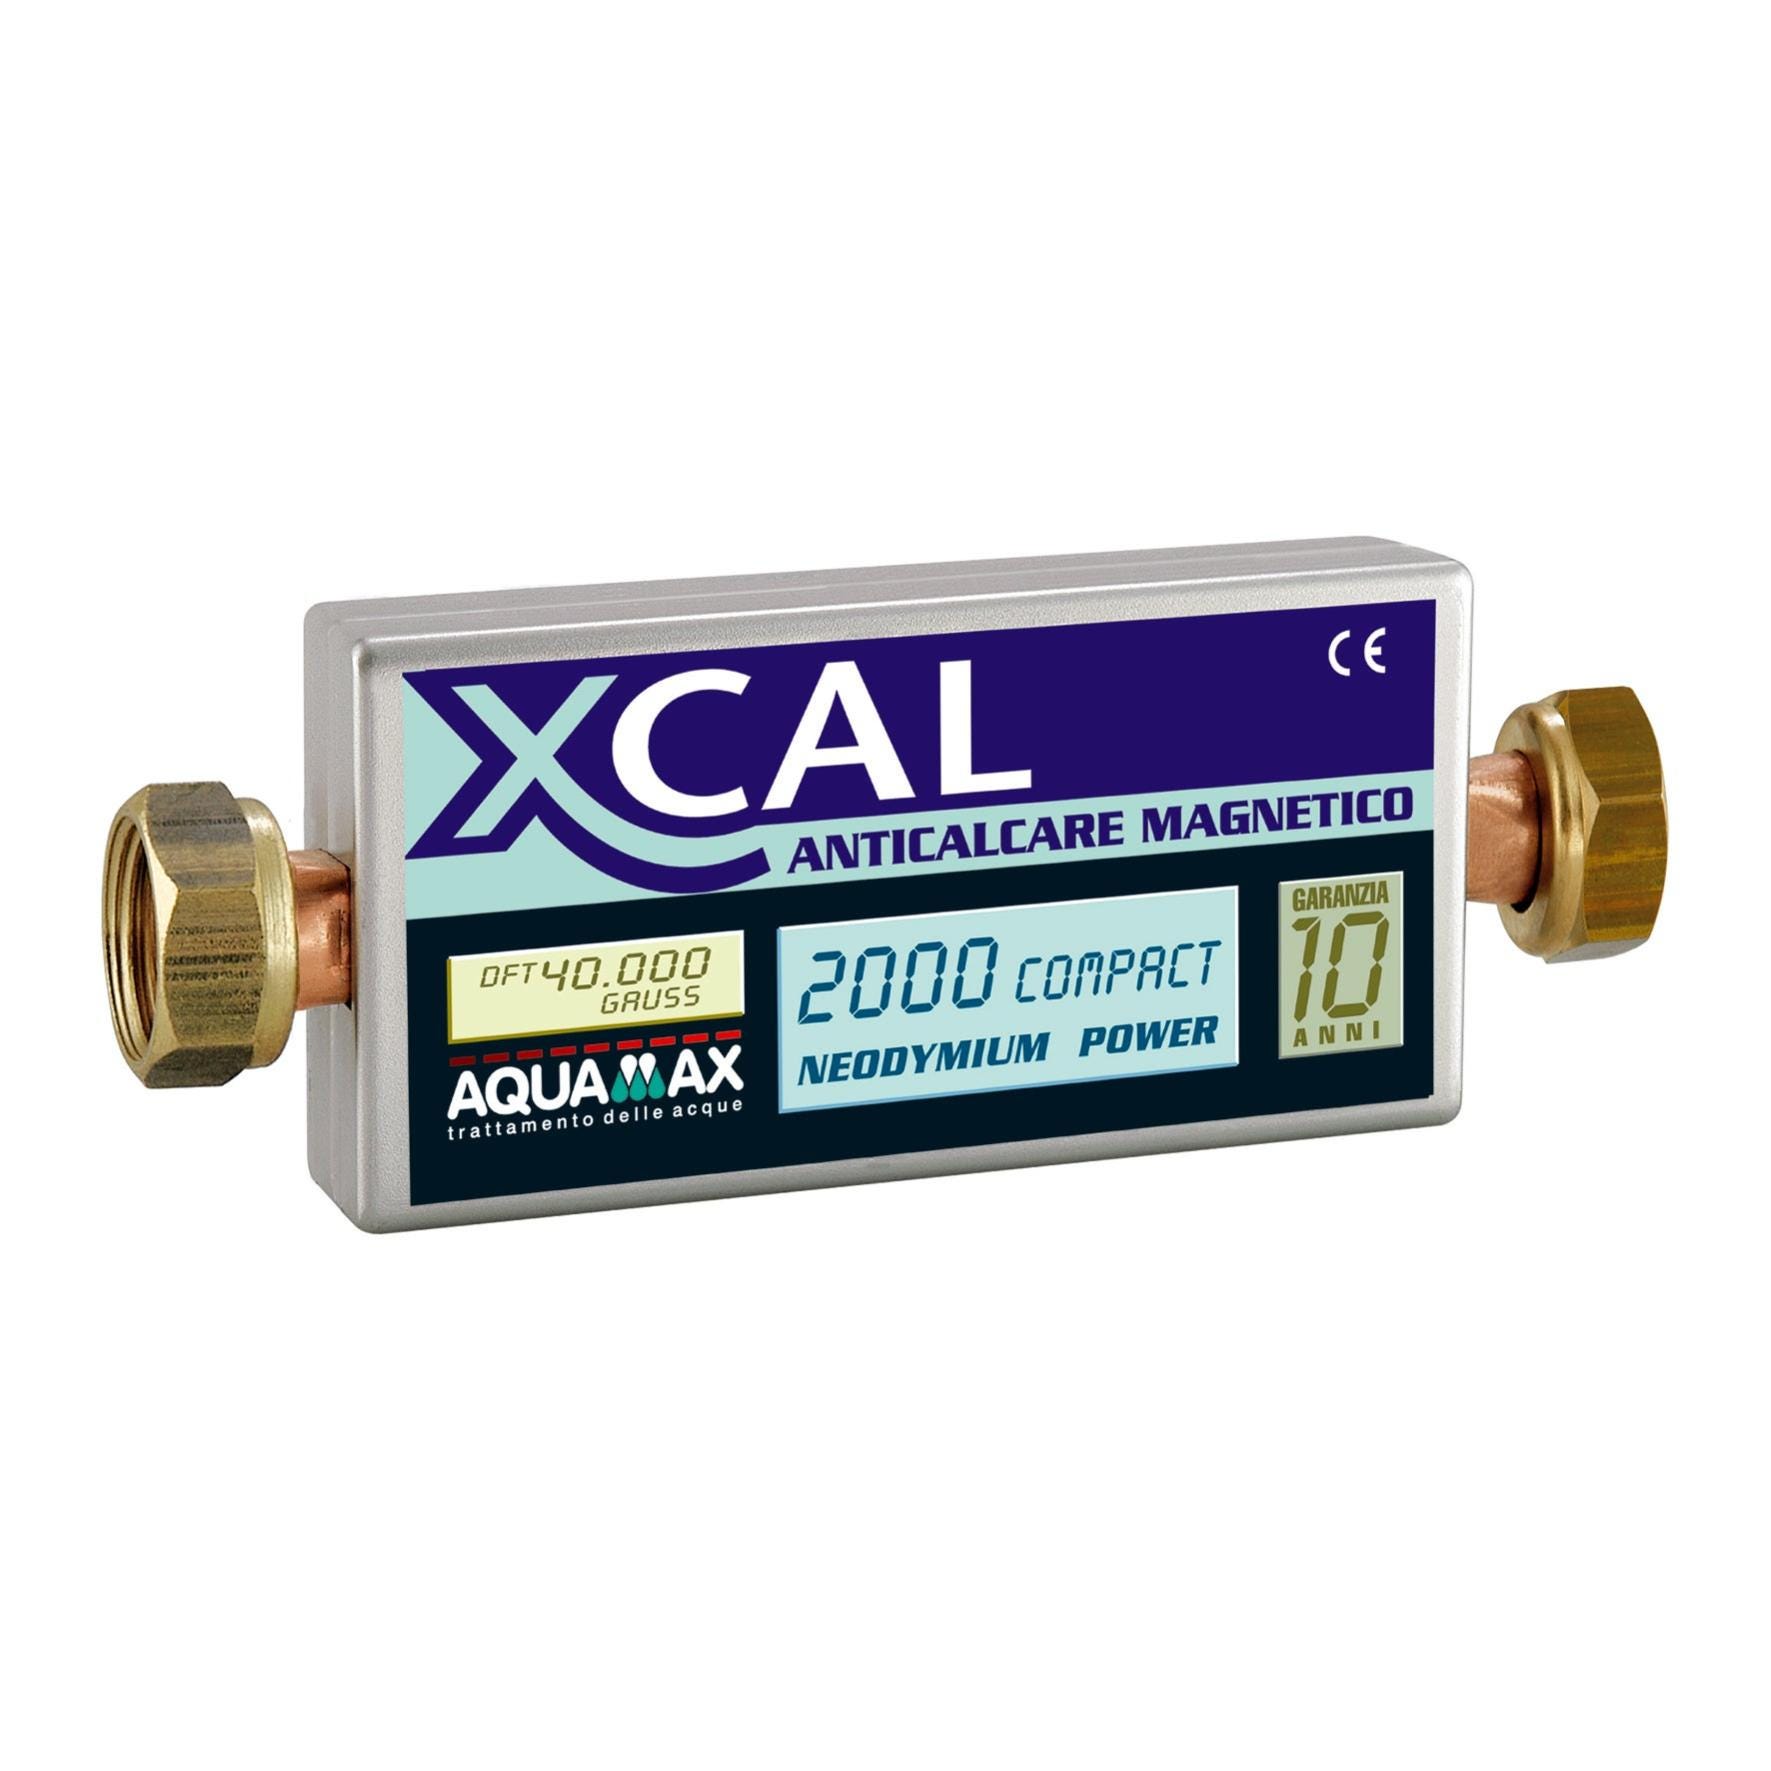 Anticalcare magnetico XCAL 2000